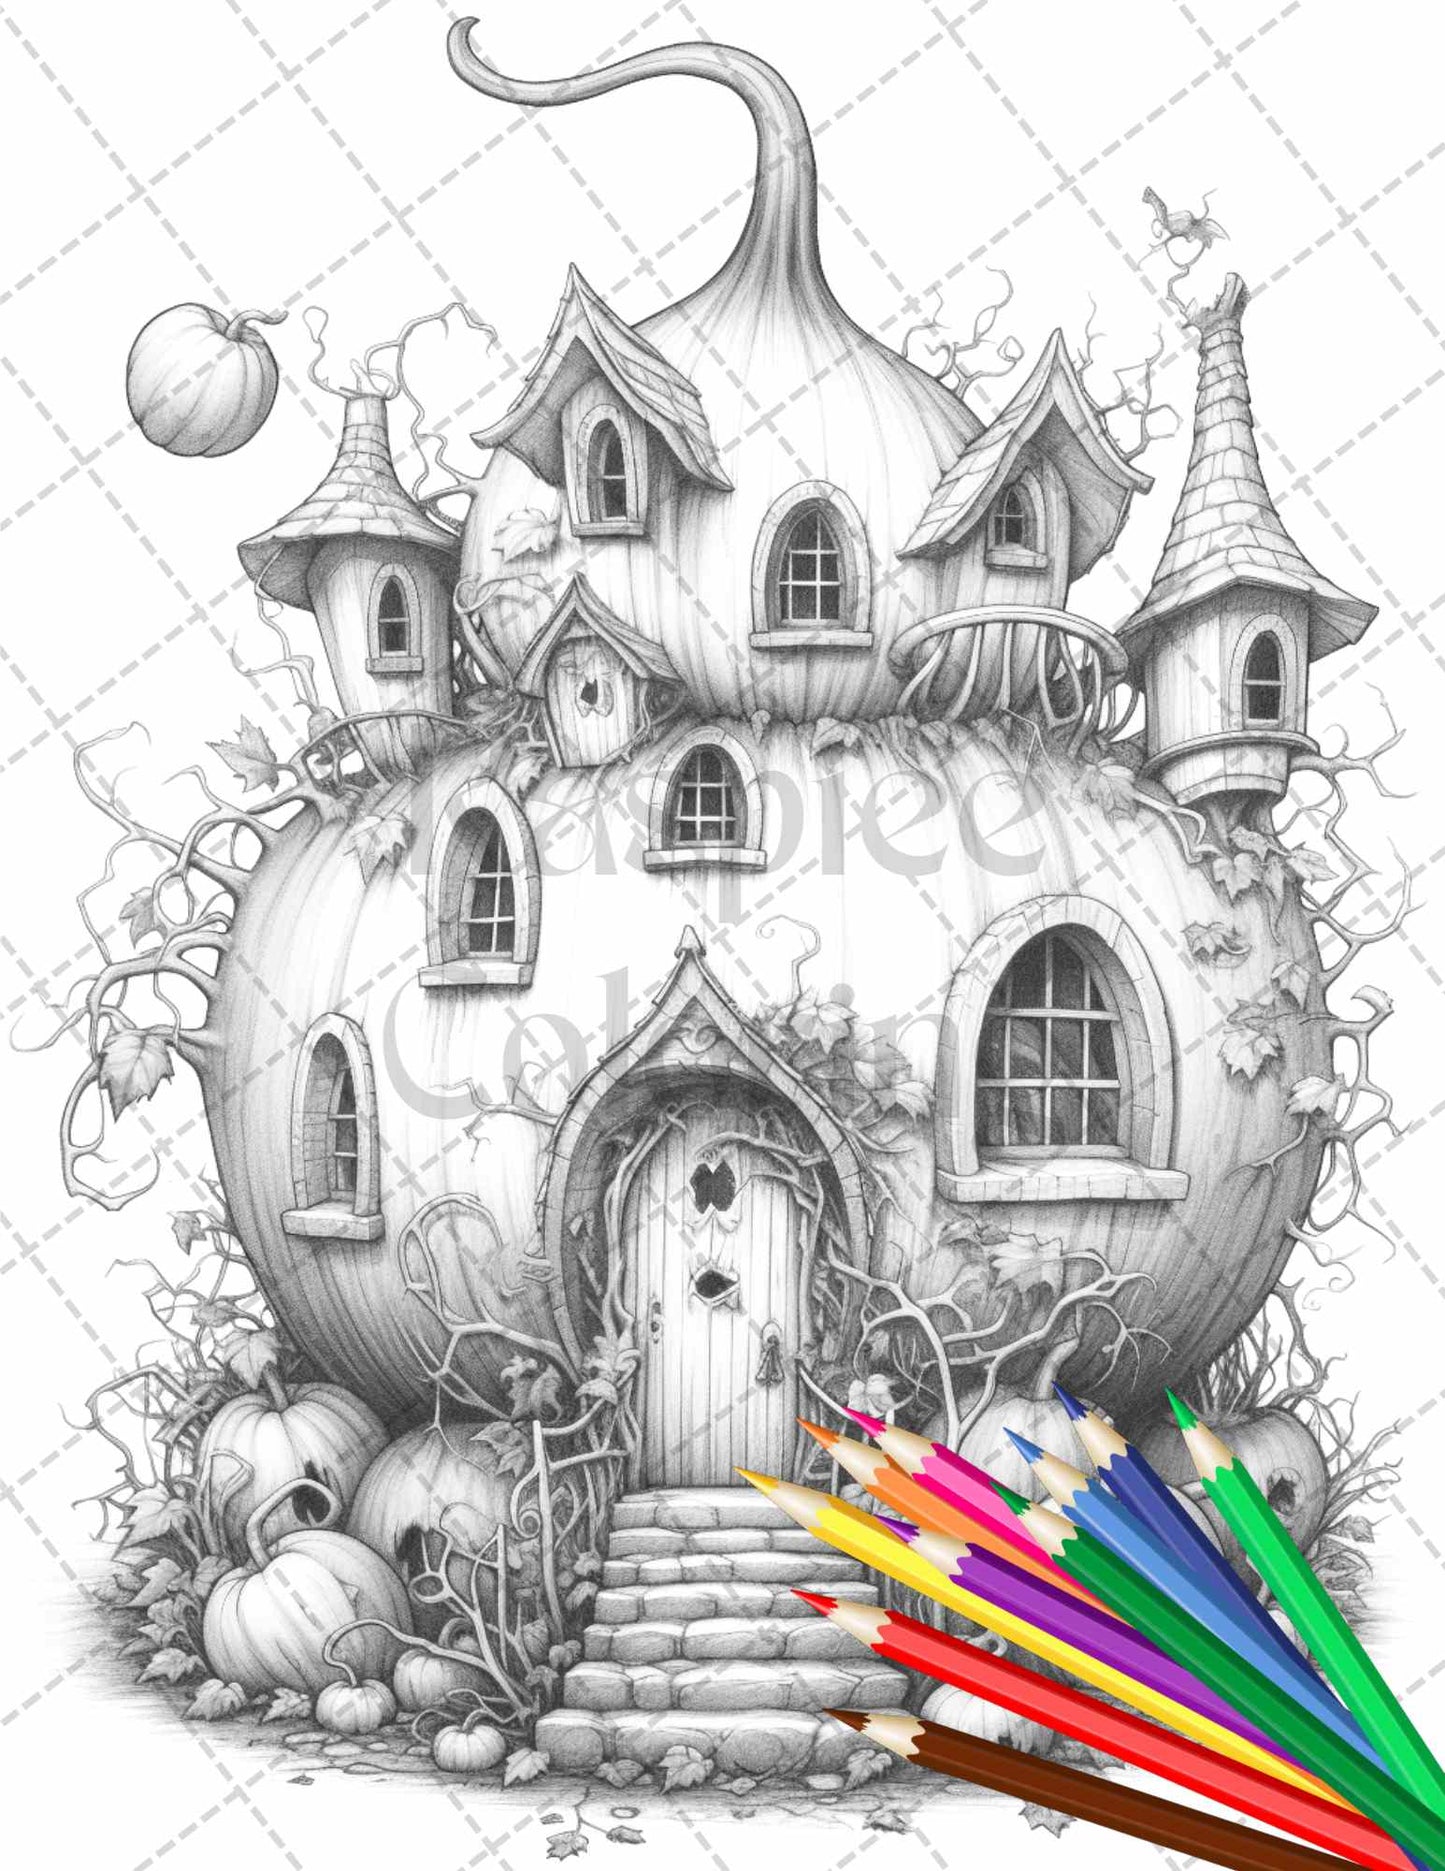 Pumpkin Fairy Houses Grayscale Coloring Pages Printable, Adult Coloring Book Autumn Theme, Halloween Coloring Sheets for Adults